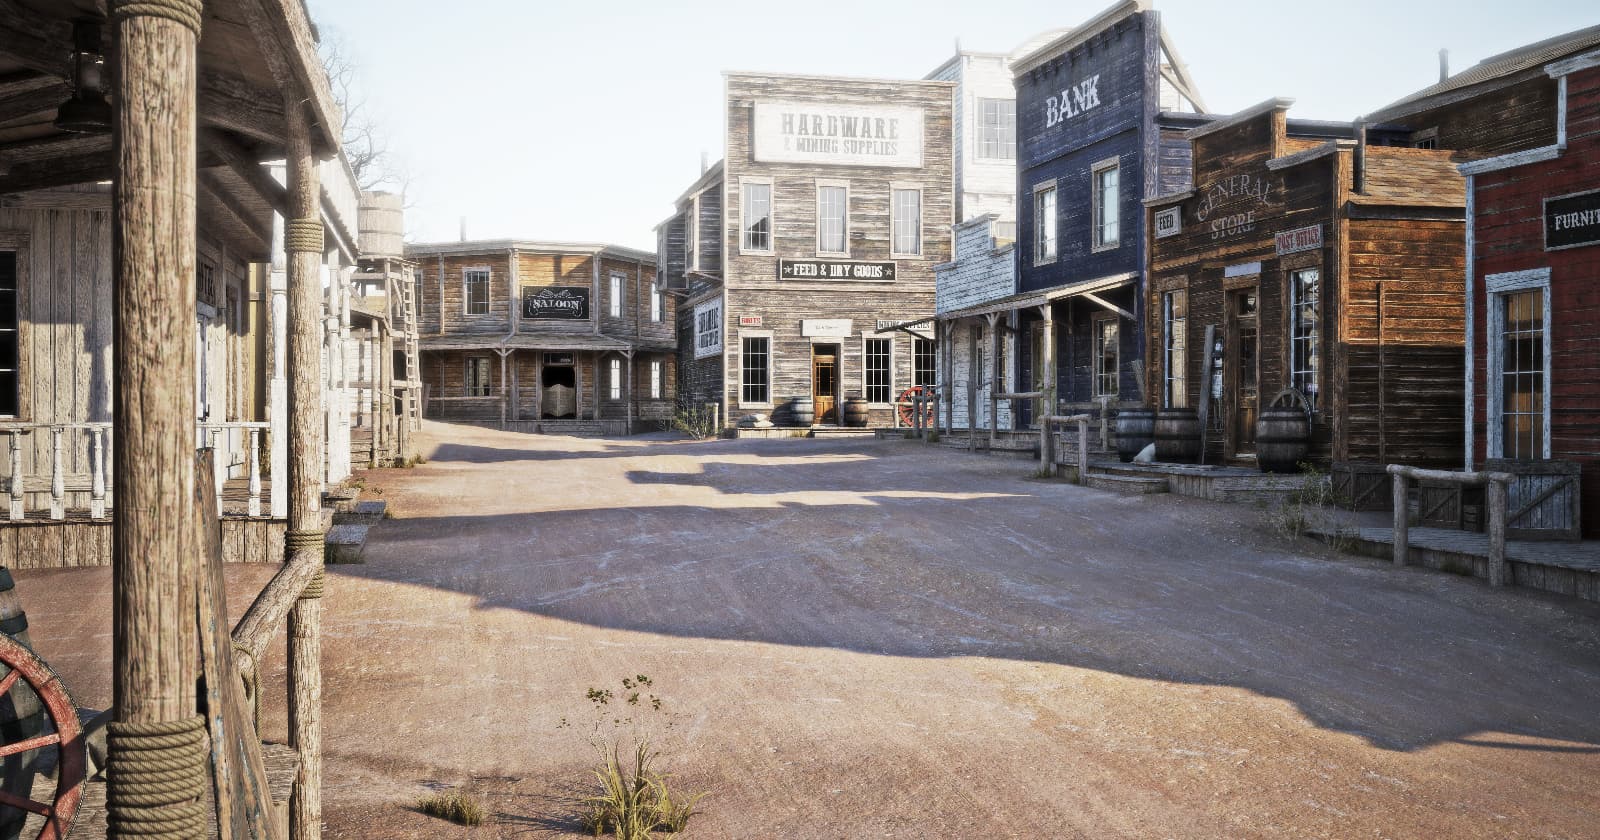 old west town rendering including bank, hardware store, and other businesses much like what the ghost towns in Nevada once looked like